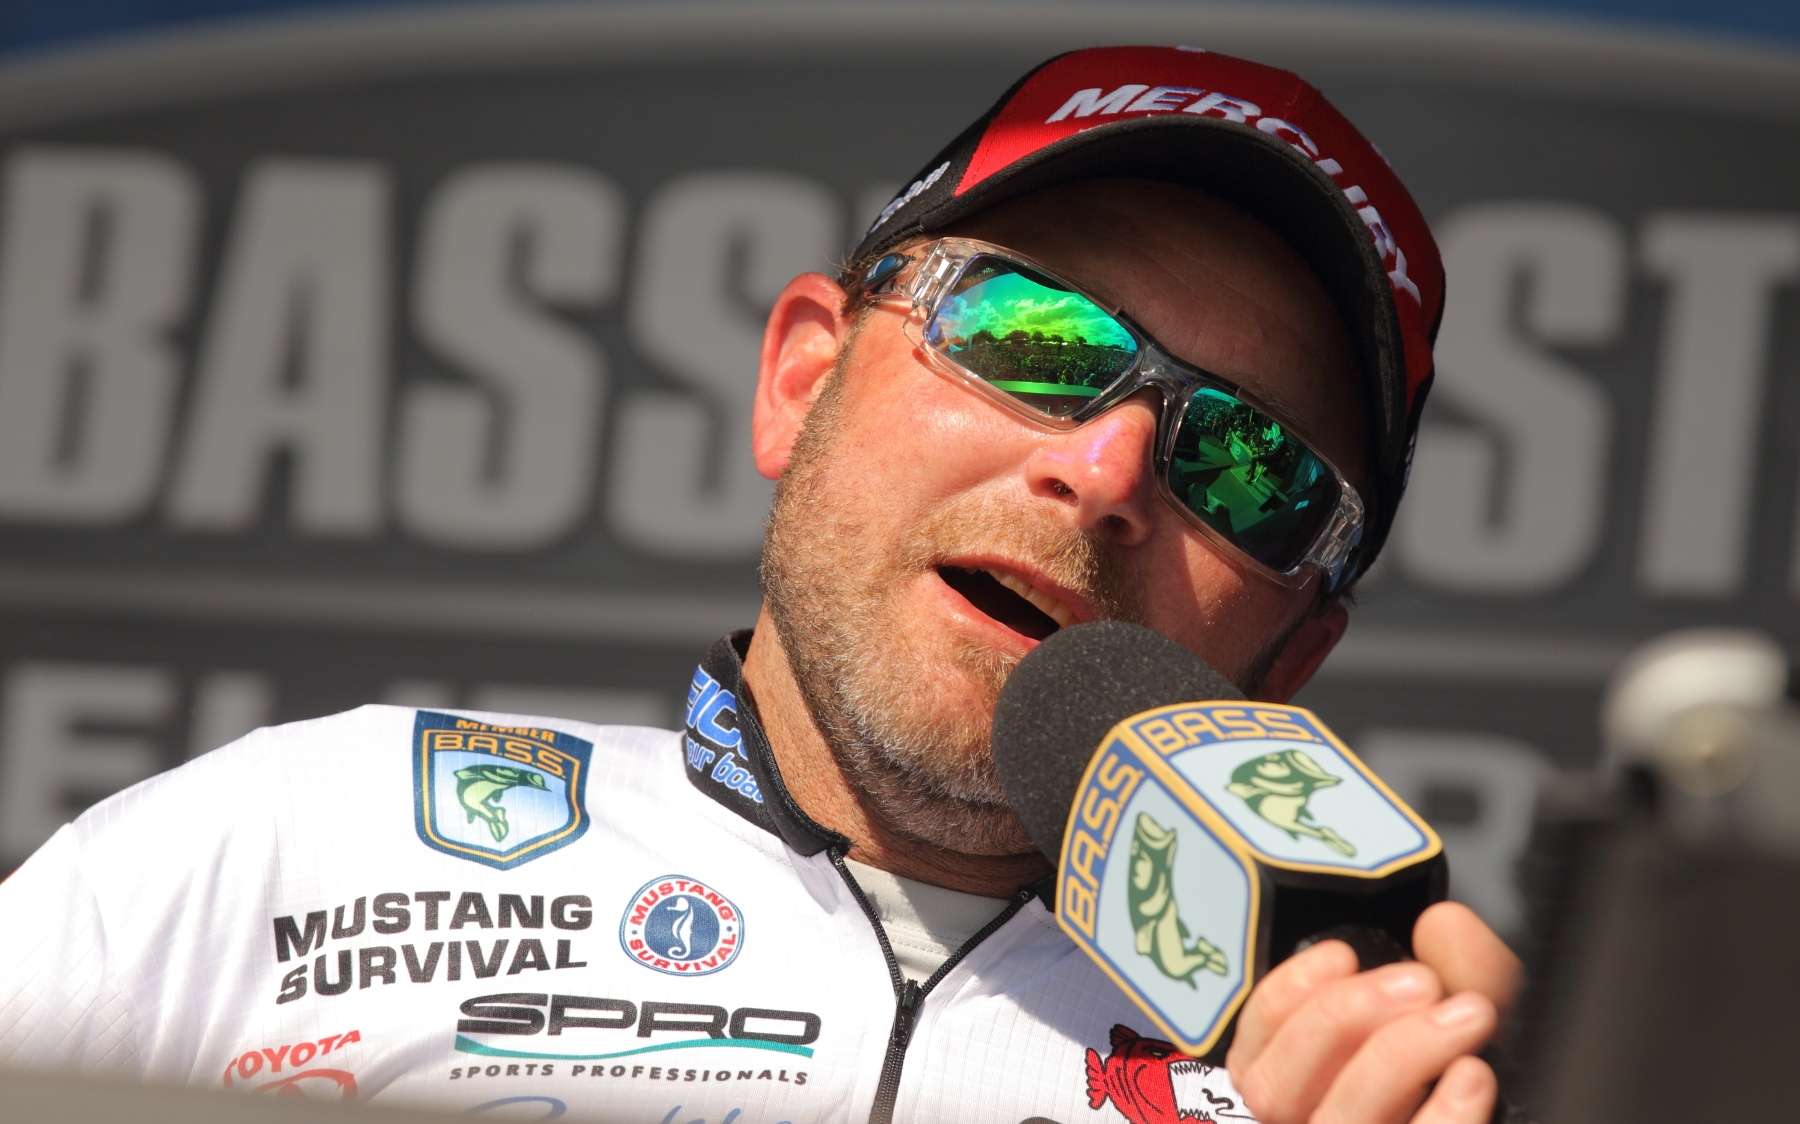 <b>Wait a Minute! Is He Even in the Classic? </b><br>
No, Mike McClelland did not qualify for this yearâs Classic, but that didnât stop several former champs from picking him â¦ or trying to. They all like his skill with a jig and patience with a jerkbait. If he had qualified, itâs clear that McClelland would be one of the favorites with the former winners, just as he was with fans and pundits when the Classic was on Grand Lake in 2013 and McClelland finished fifth. Jeff Kriet also got a vote despite not qualifying. Of course, Cliff Pace, who won the last Grand Lake Classic would be a big favorite had he qualified in 2016.